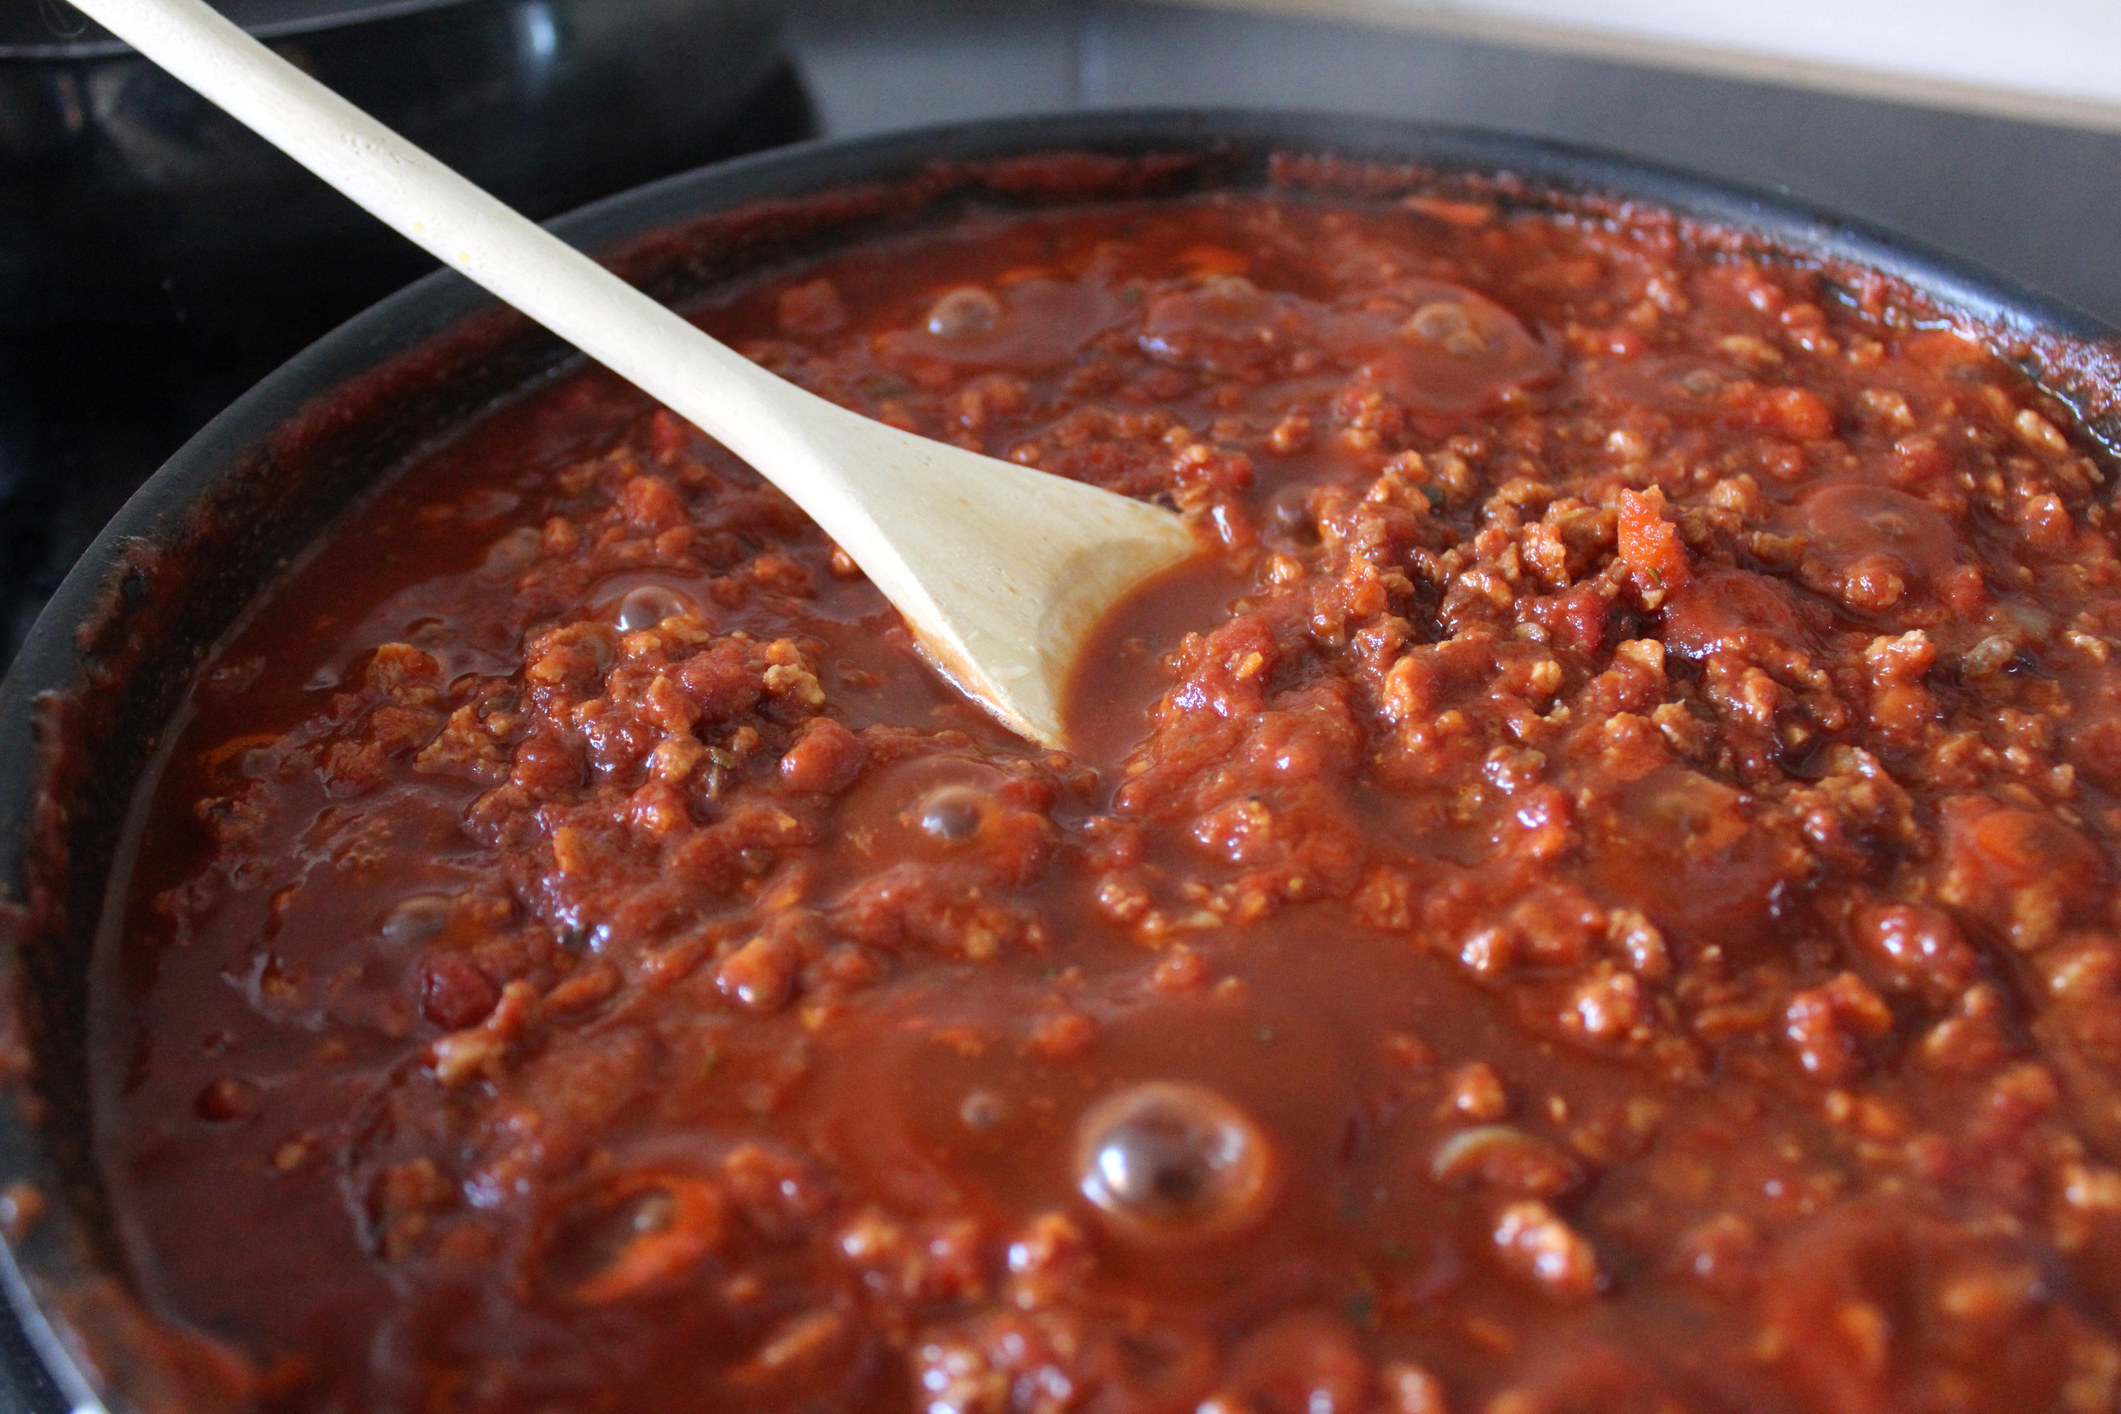 Image of Bolognese sauce cooking in a frying pan